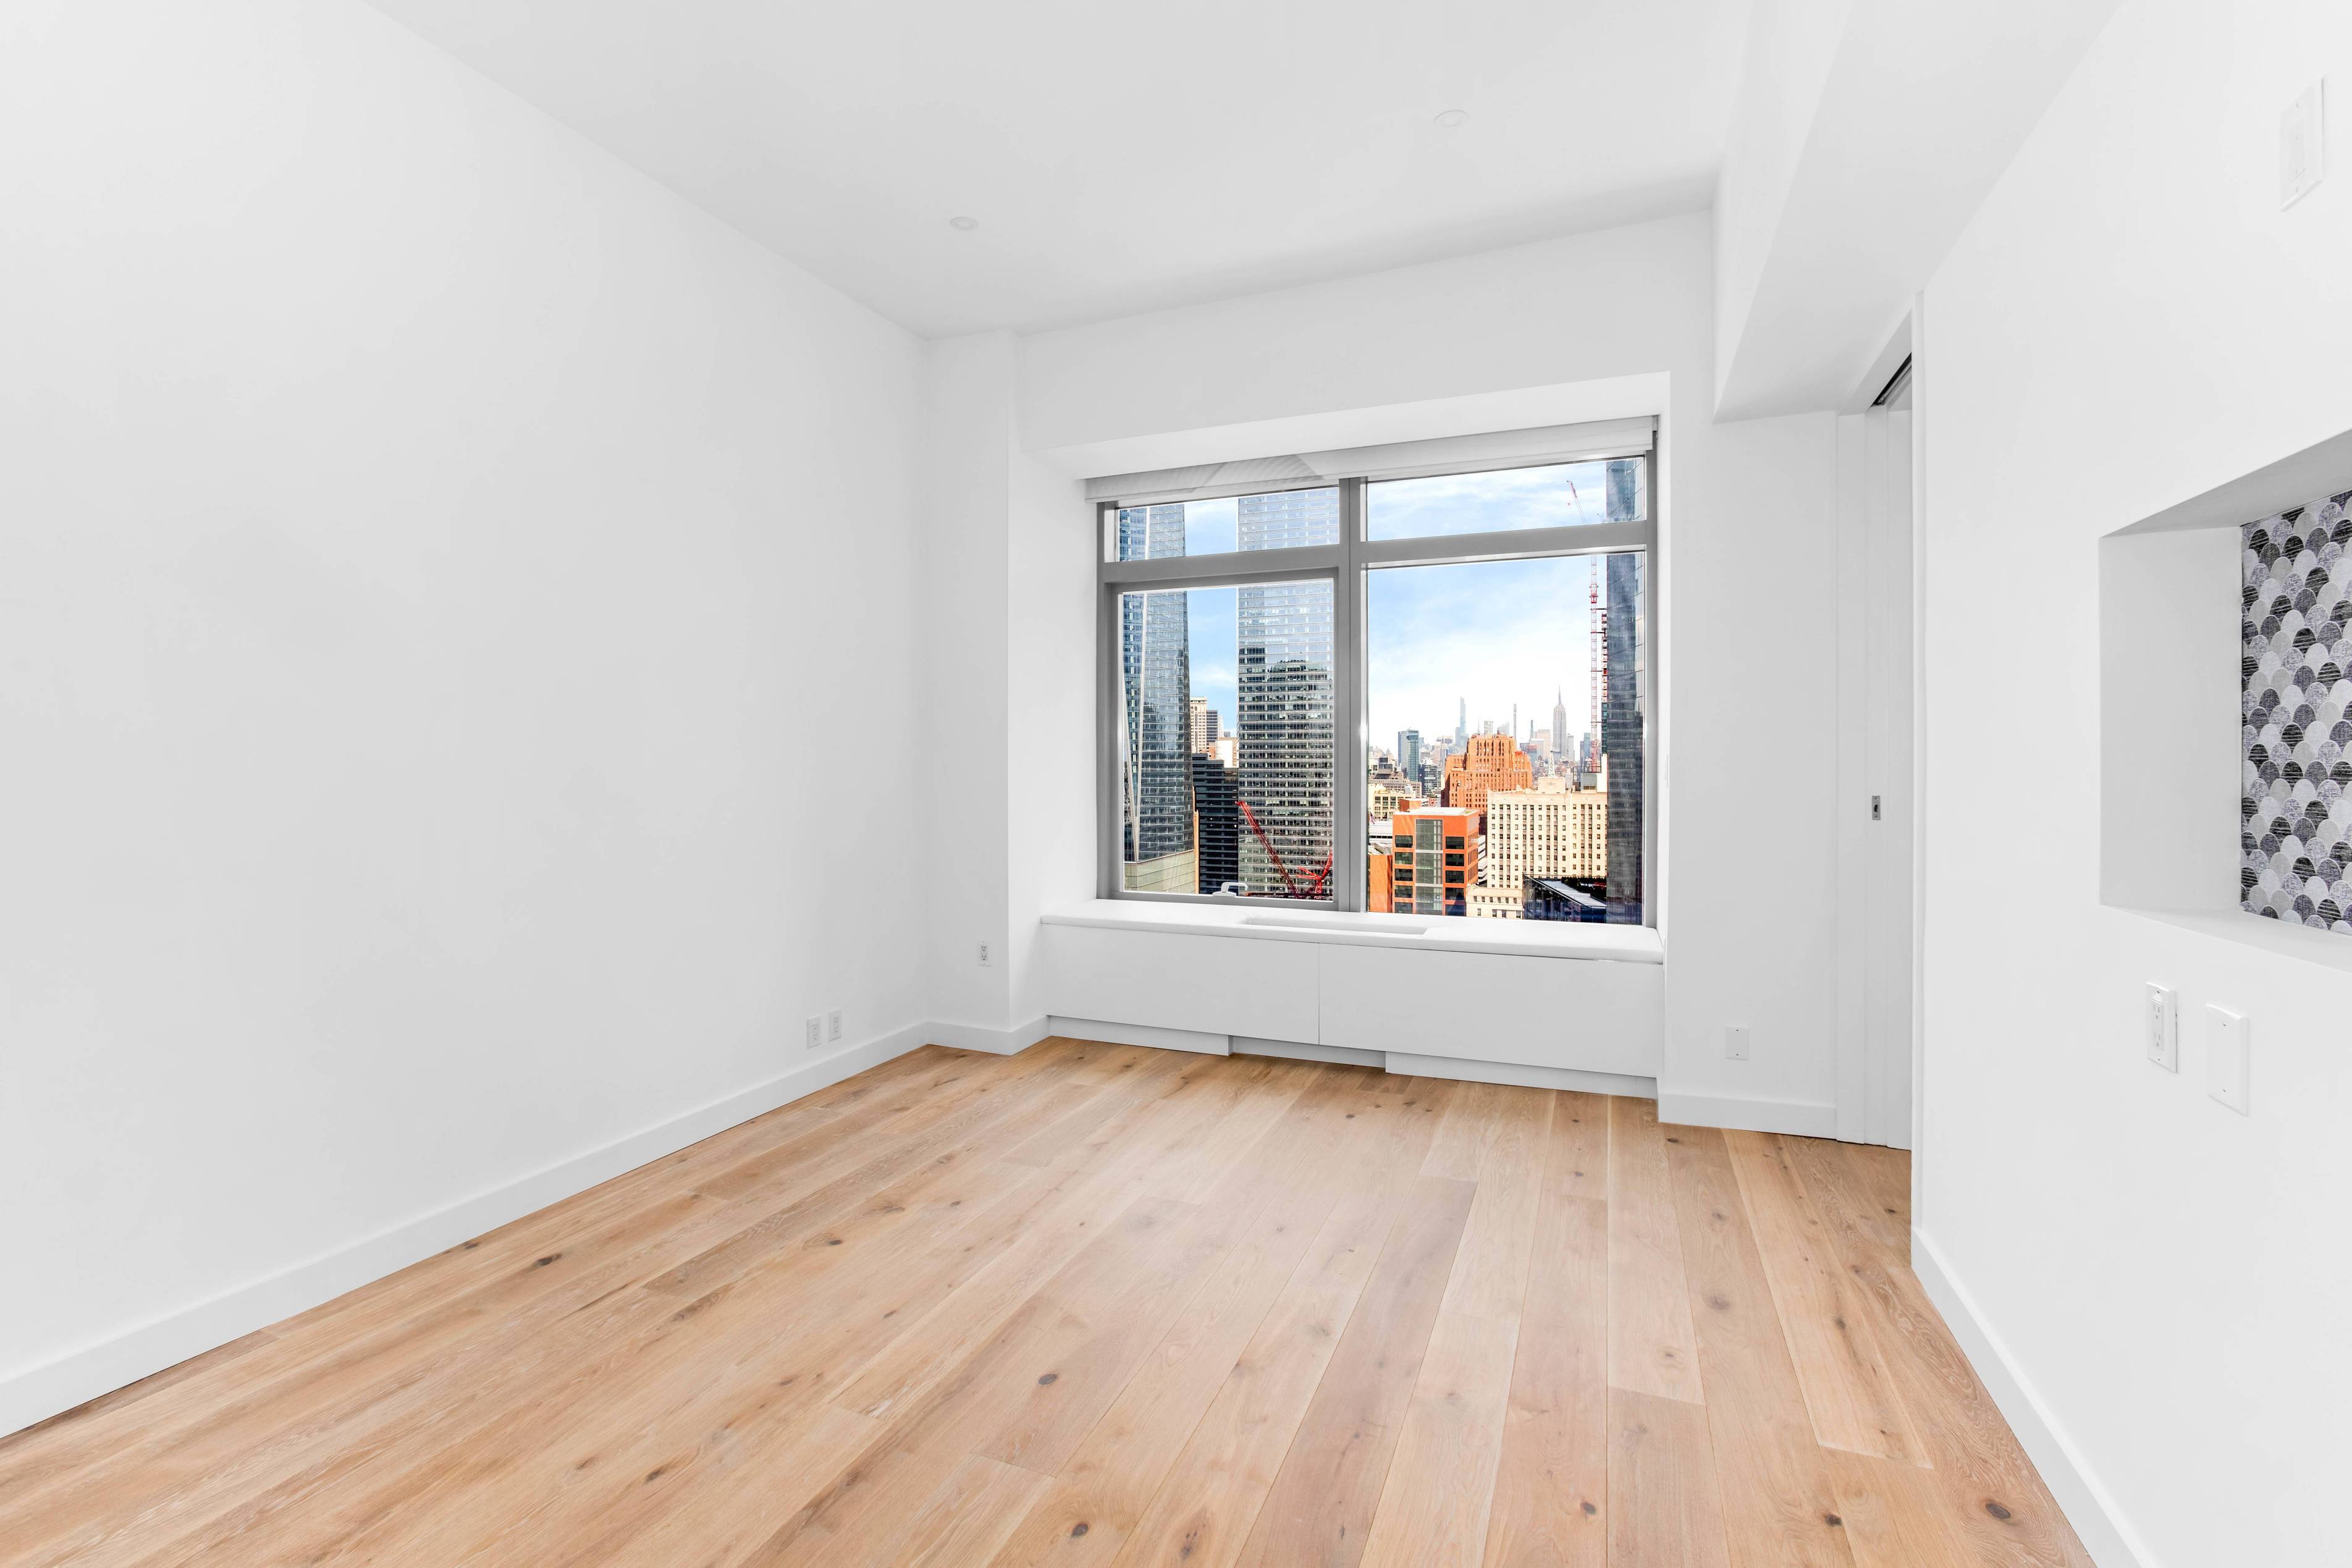 Located on the thirtieth floor of the building, this newly renovated one bedroom boasts unobstructed northern views of New York s most iconic buildings.